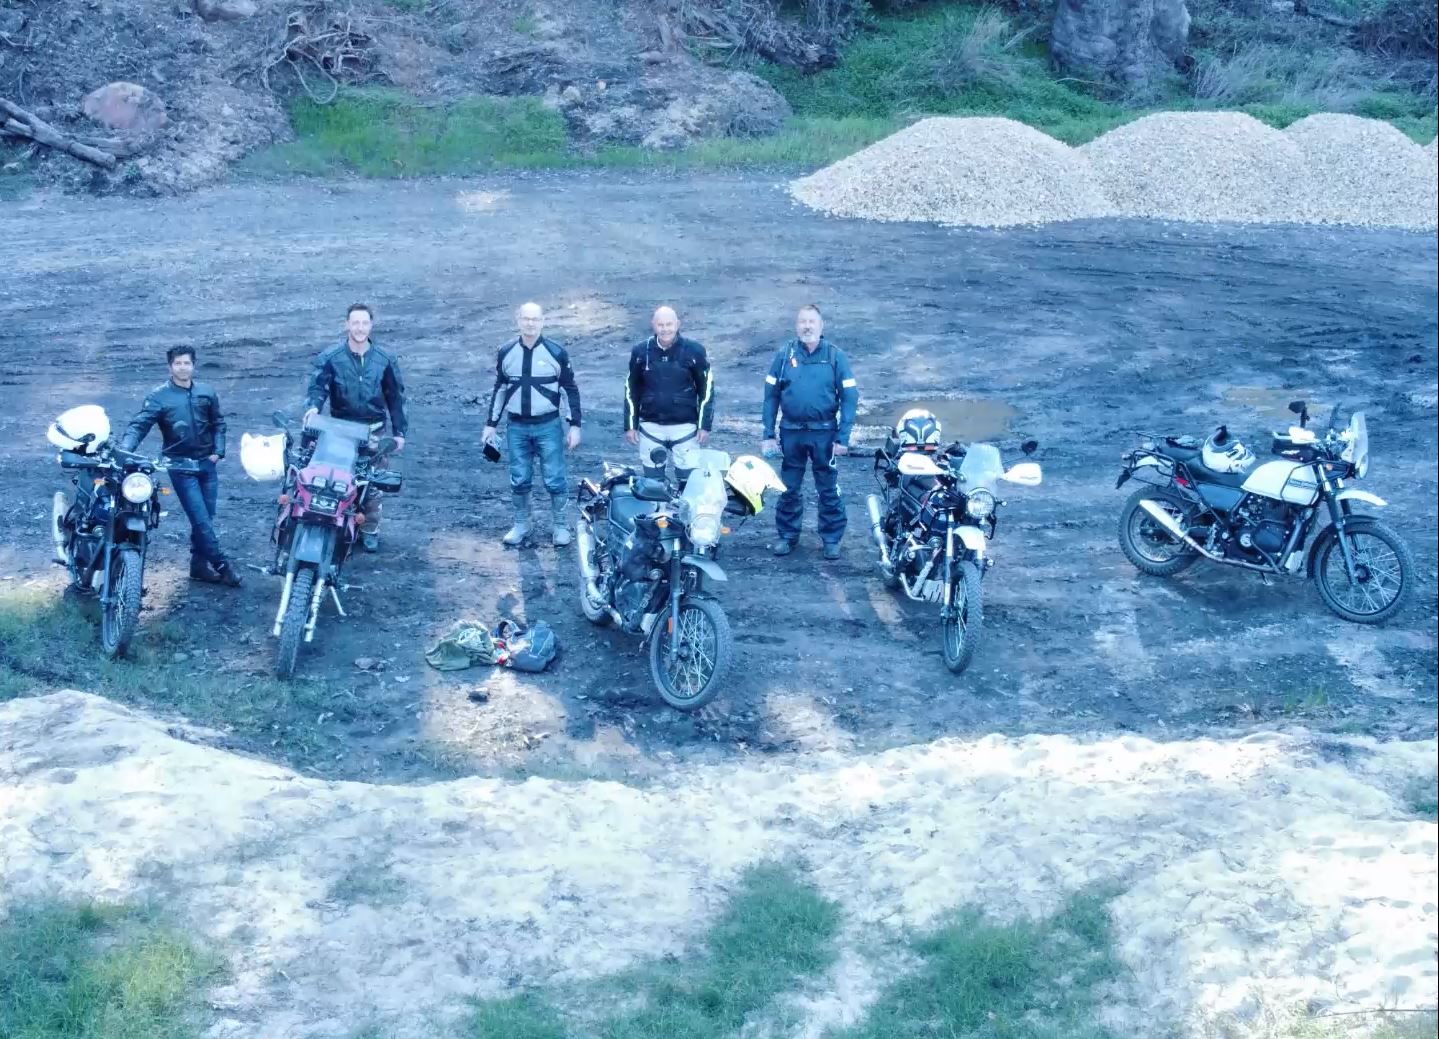 A group of people on motorcycles

Description automatically generated with medium confidence